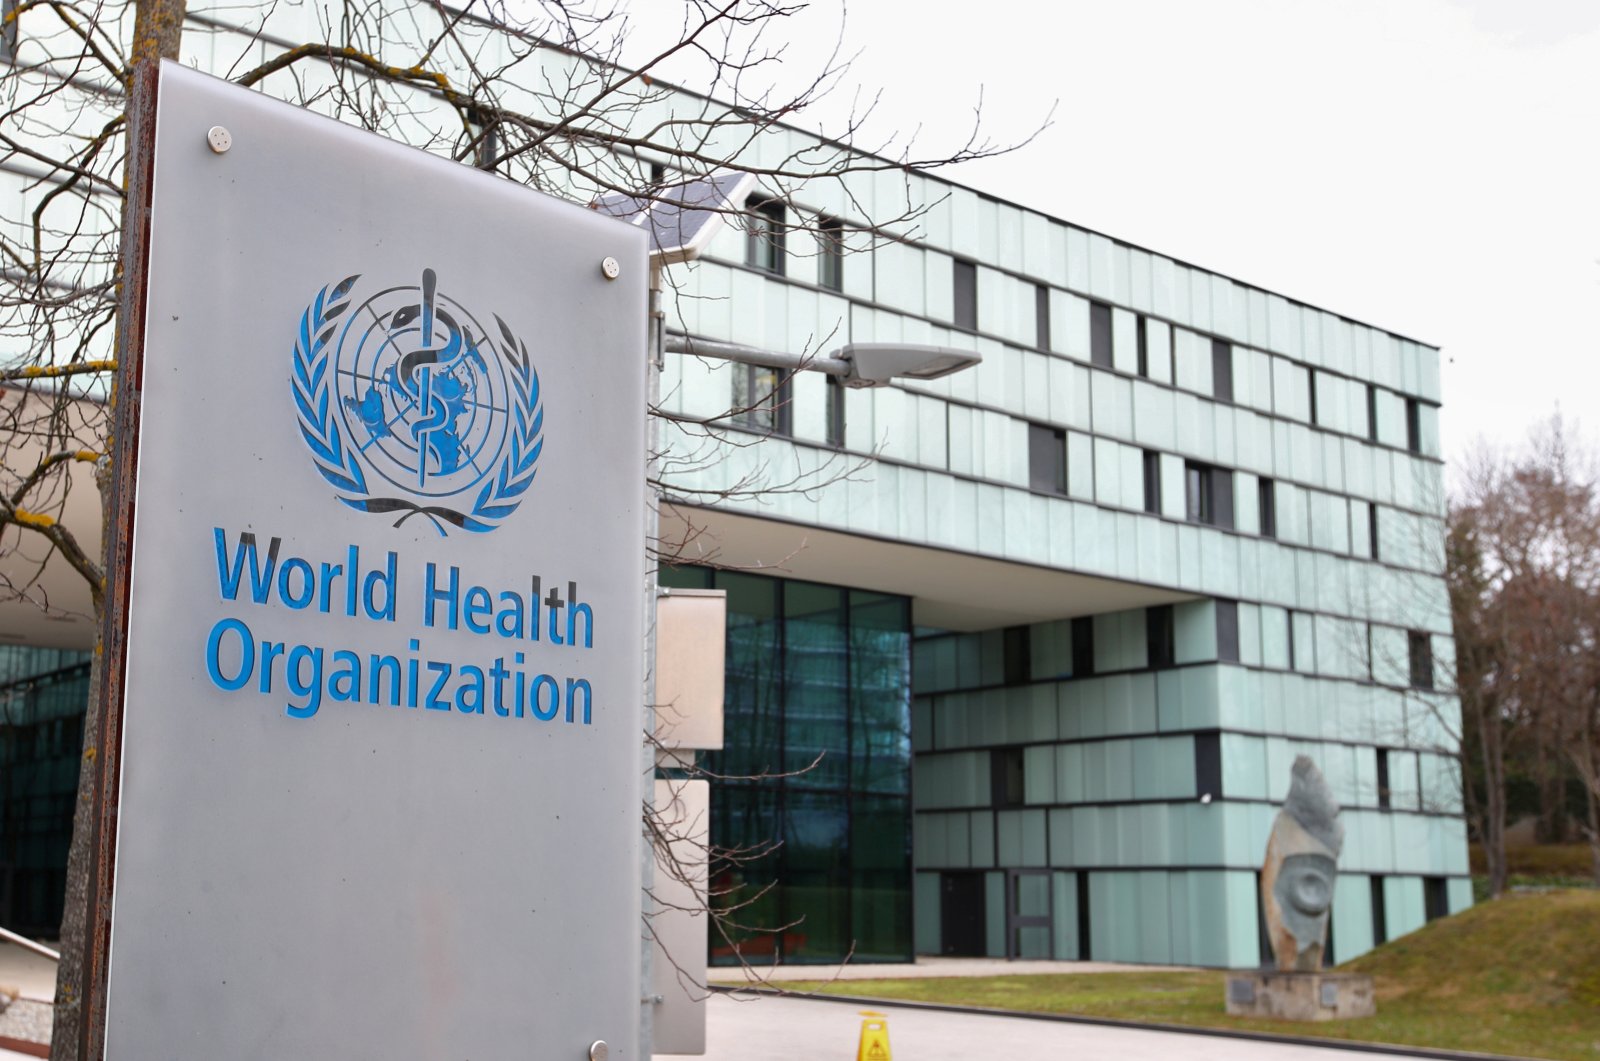 A World Health Organization (WHO) logo outside one of its buildings during an executive board meeting on updates on the coronavirus outbreak, in Geneva, Switzerland, Feb. 6, 2020. (Reuters Photo)